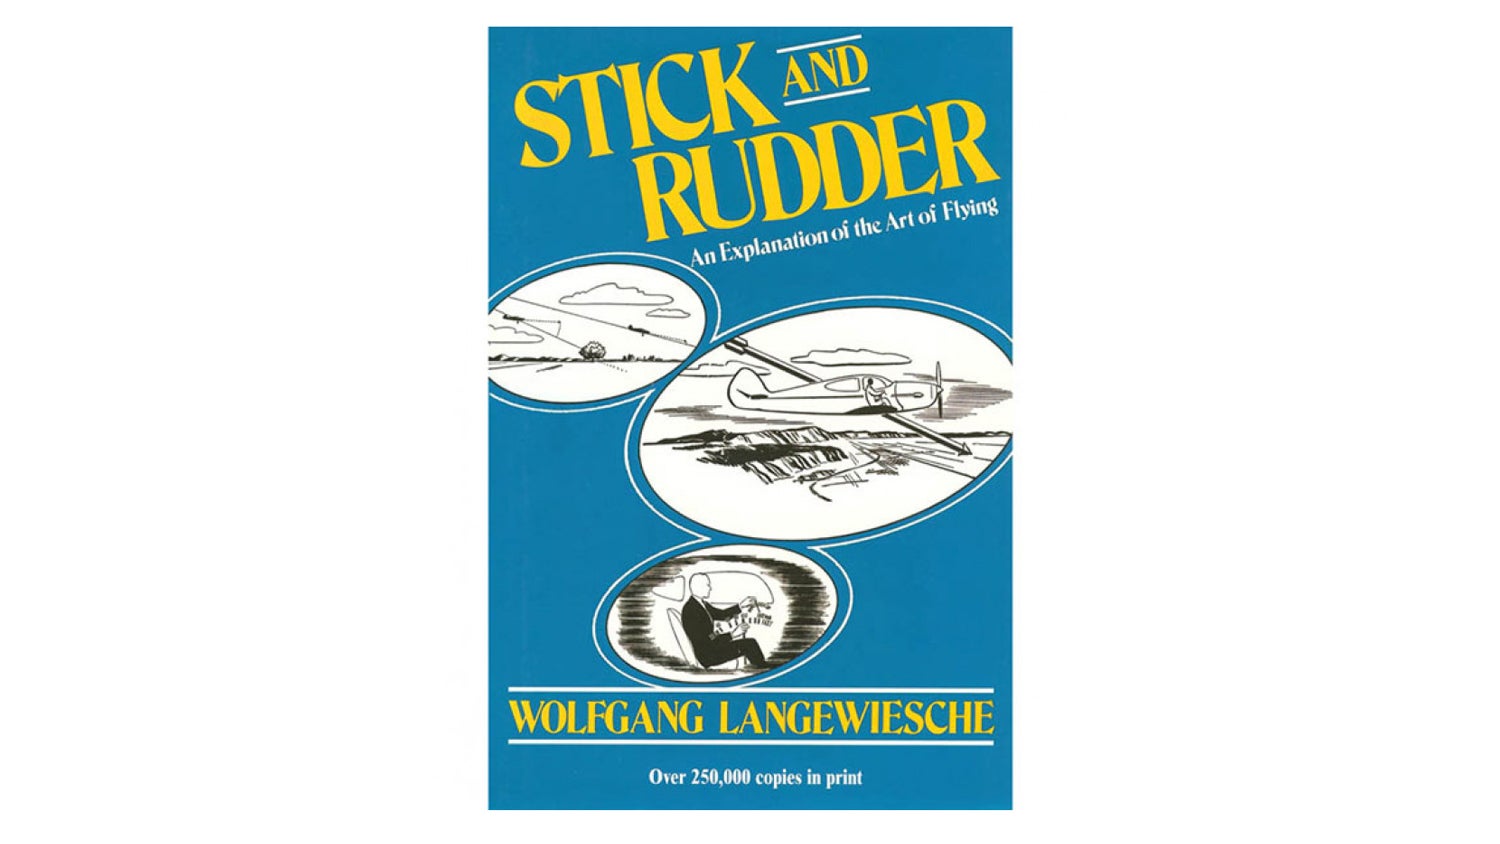 Stick and Rudder: An Explanation of the Art of Flying by Wolfgang Langewiesche